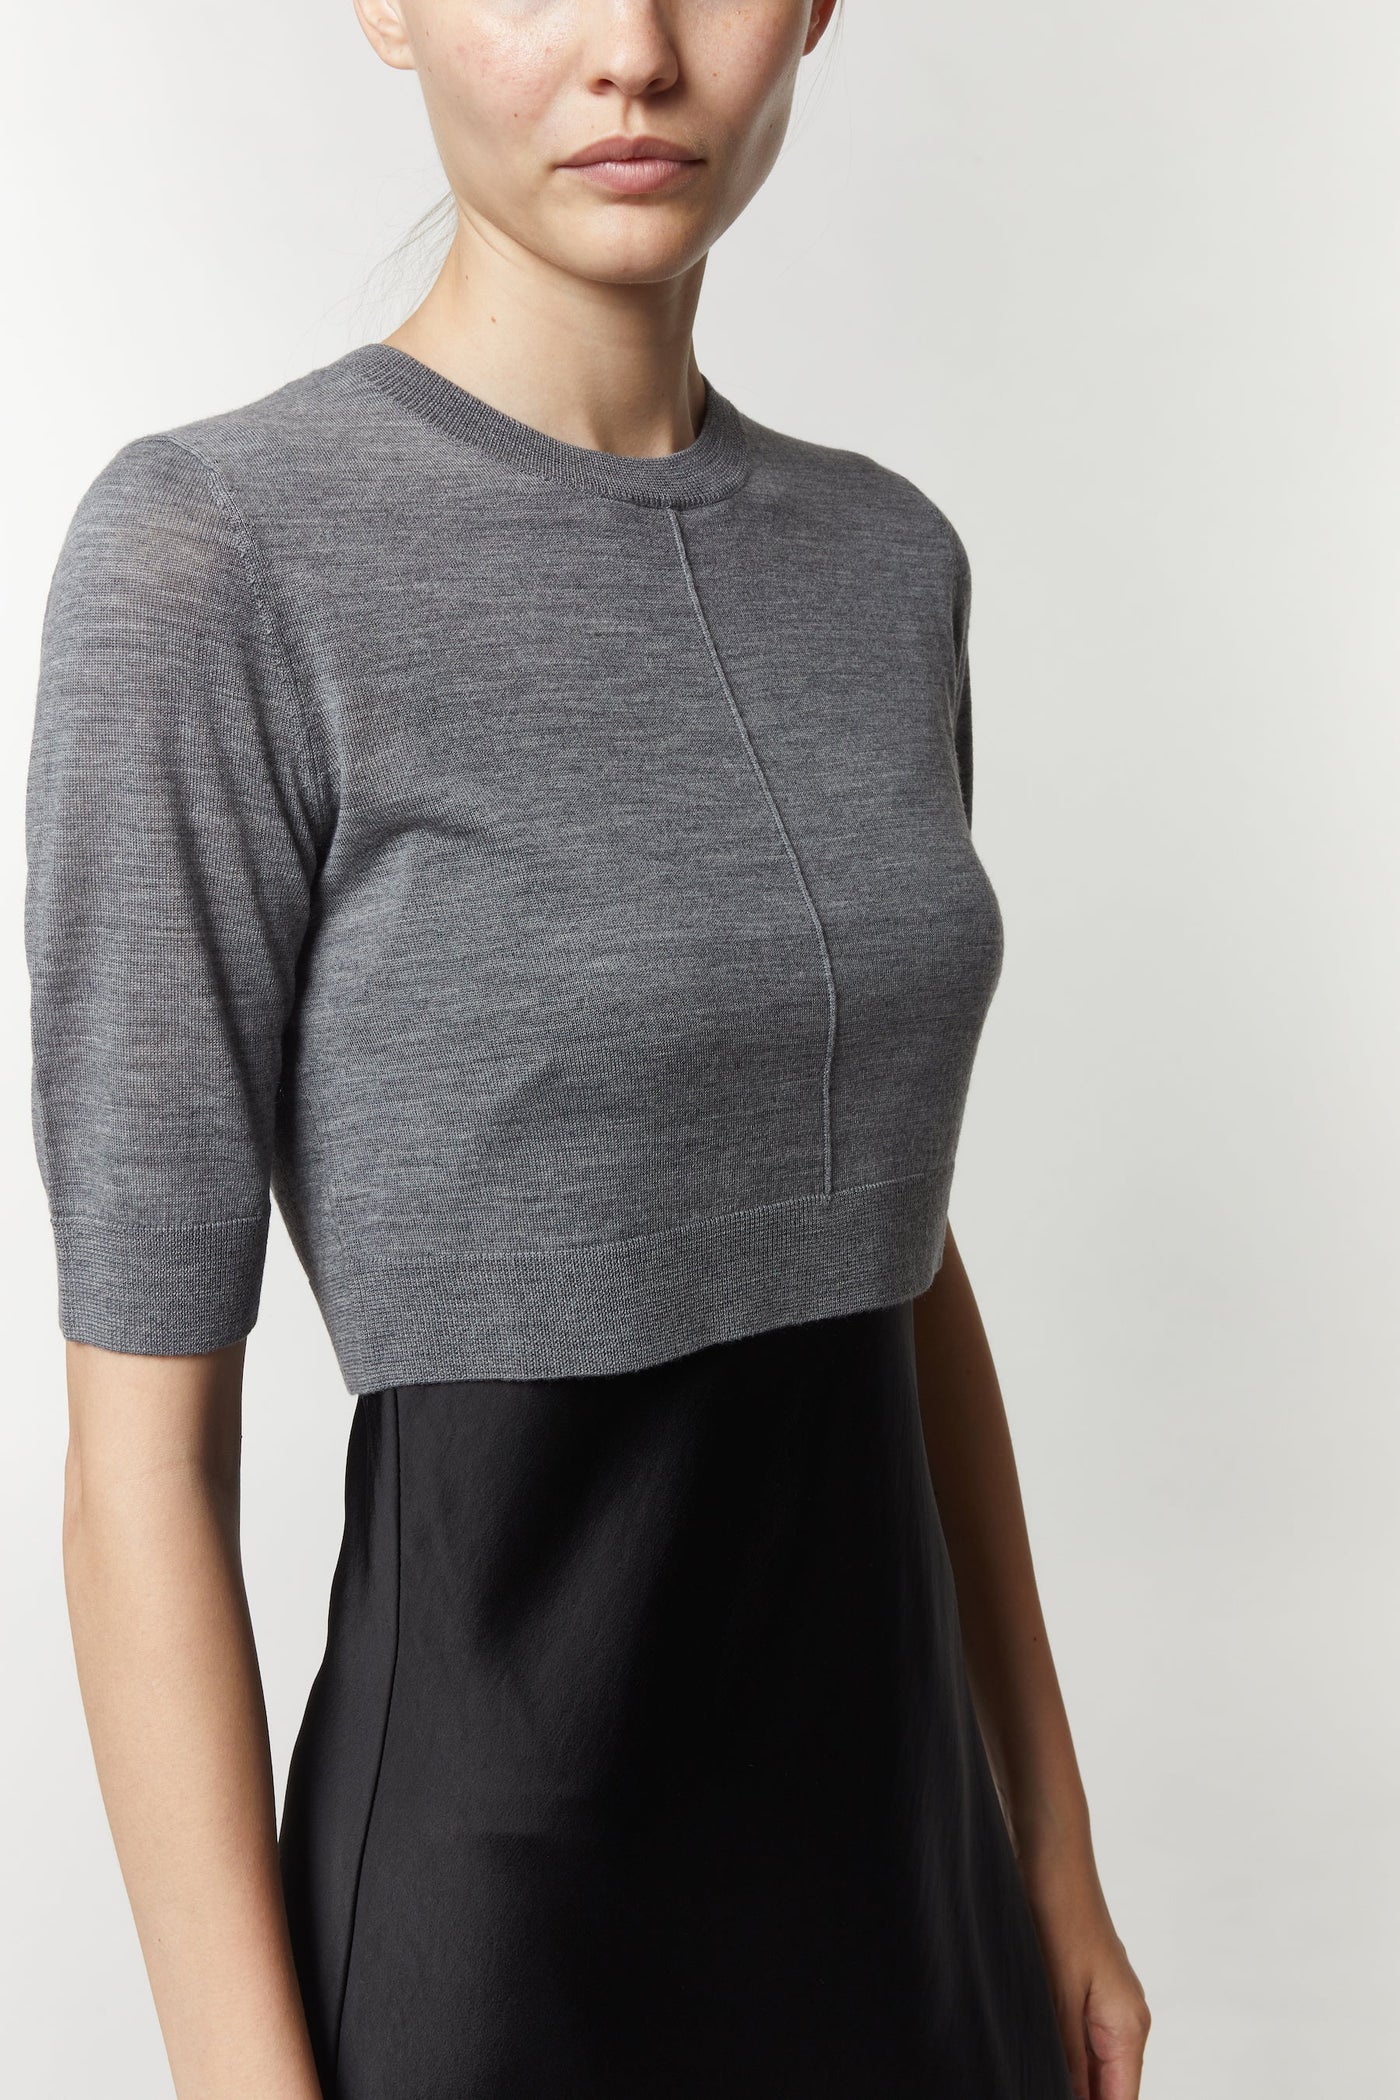 Norah Cropped Knit - Pale Heather Grey